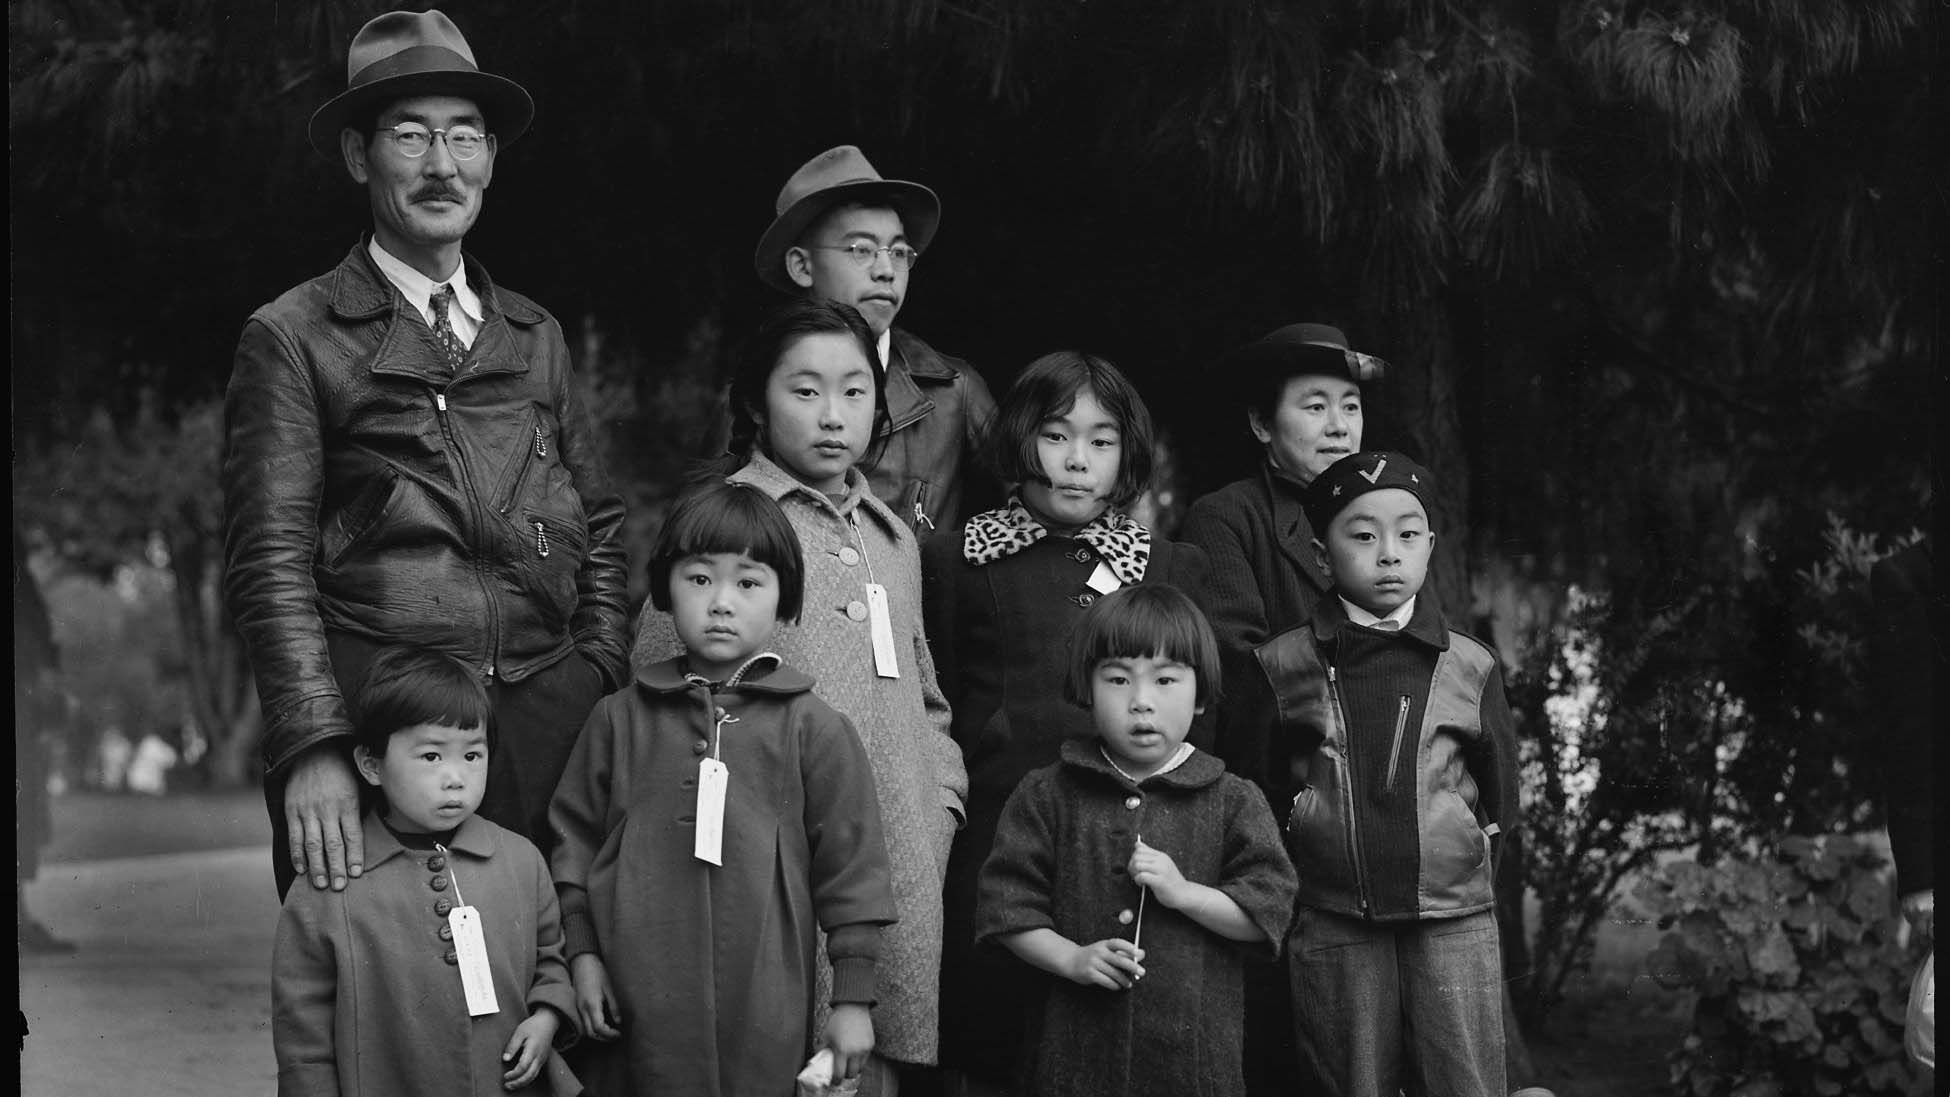 The Machida family as they waited for transportation to an internment camp in Hayward, California in May 1942. 